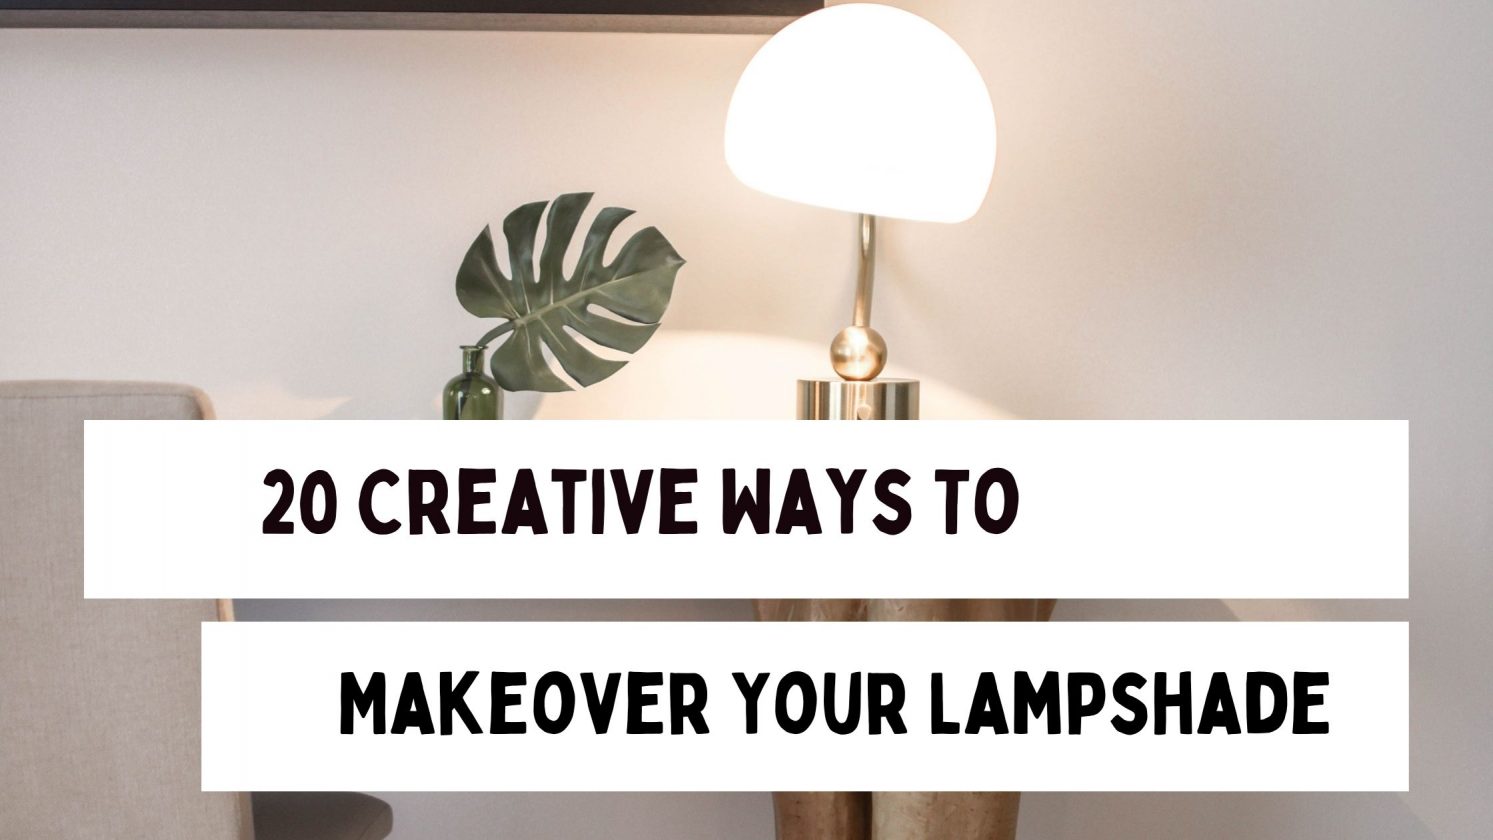 Makeover Your Lampshade